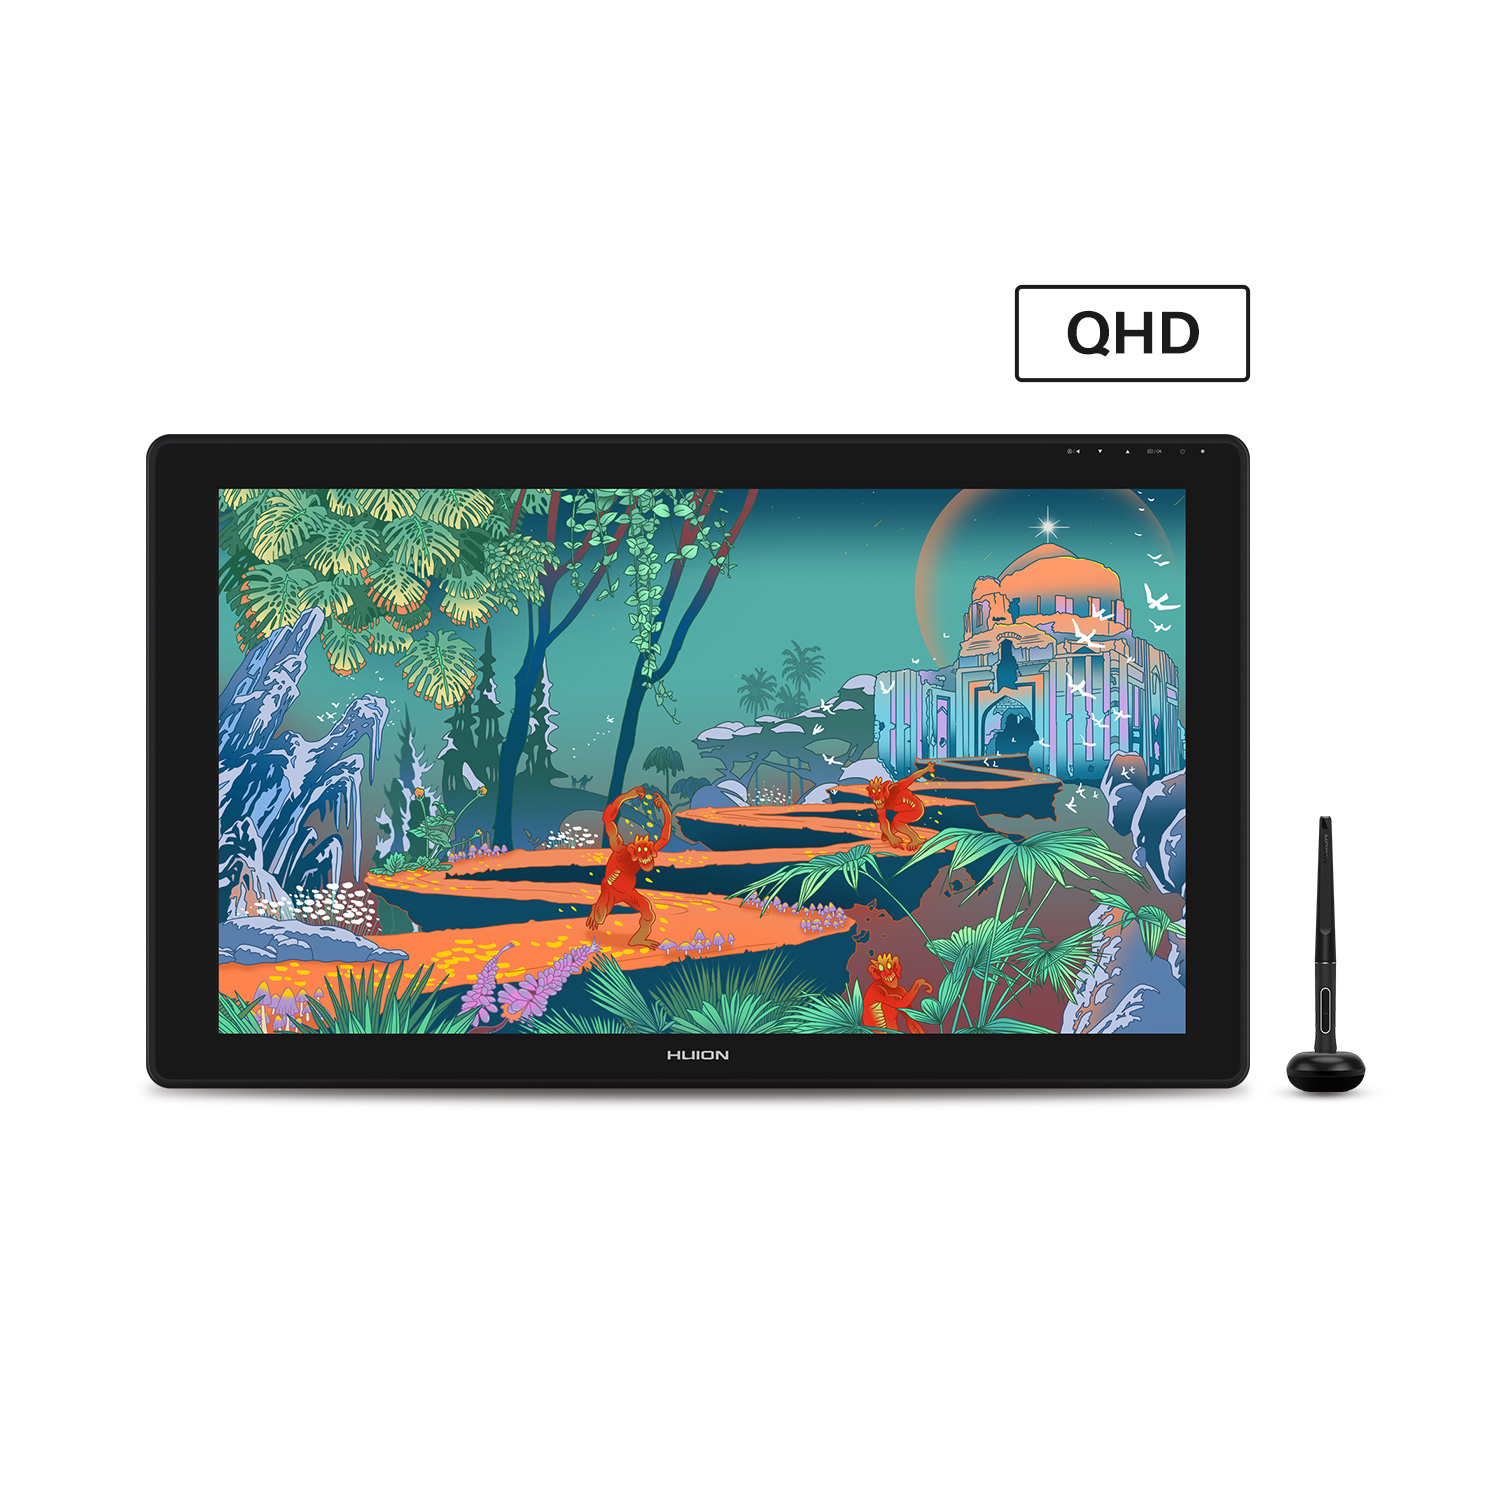 Kamvas 24 Series QHD Graphic Monitor for Artists with KD100 